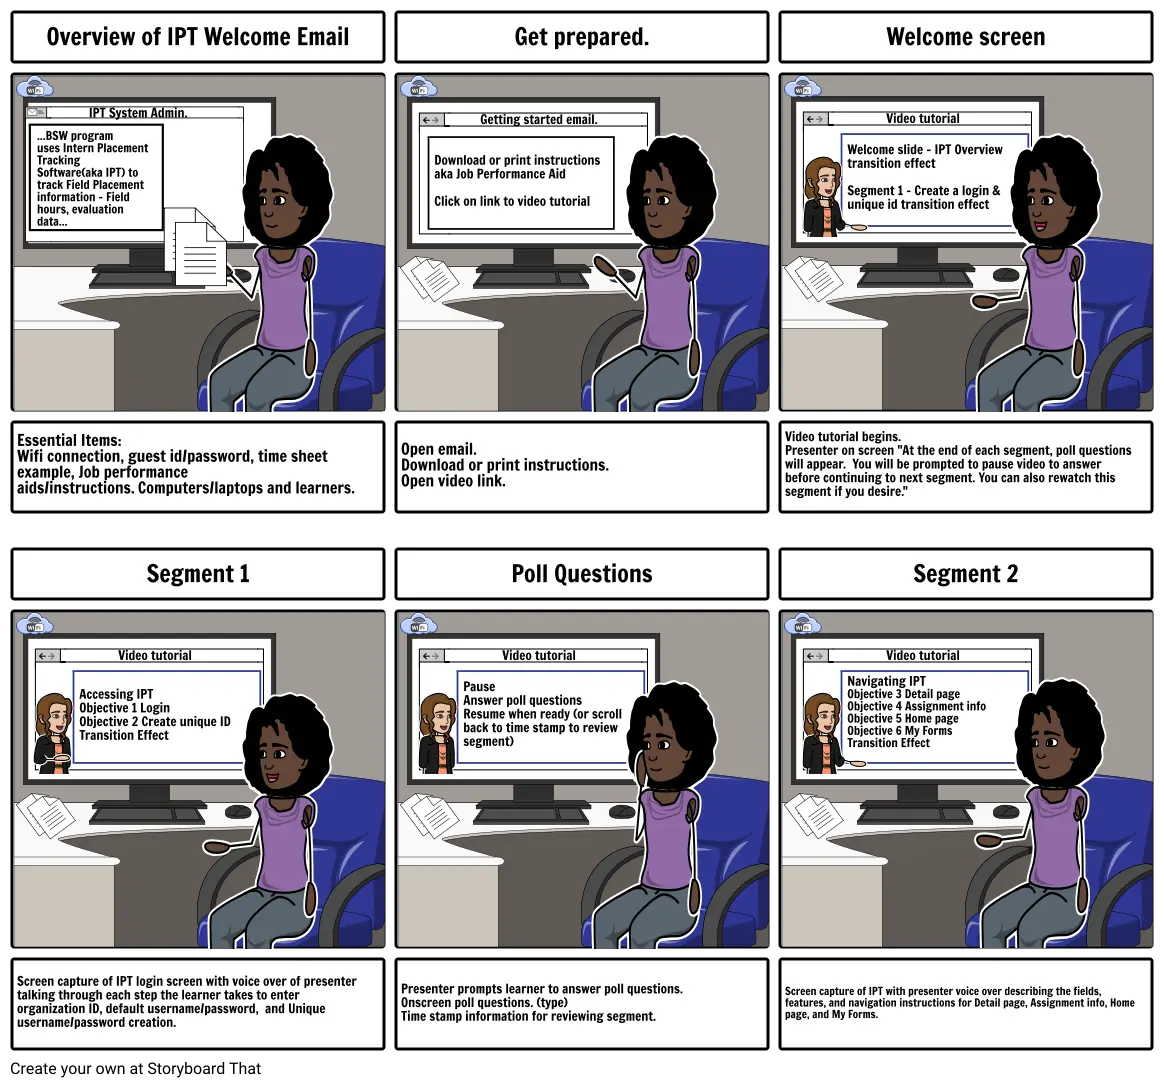 Overview of Intern Placement Tracking Software Storyboard